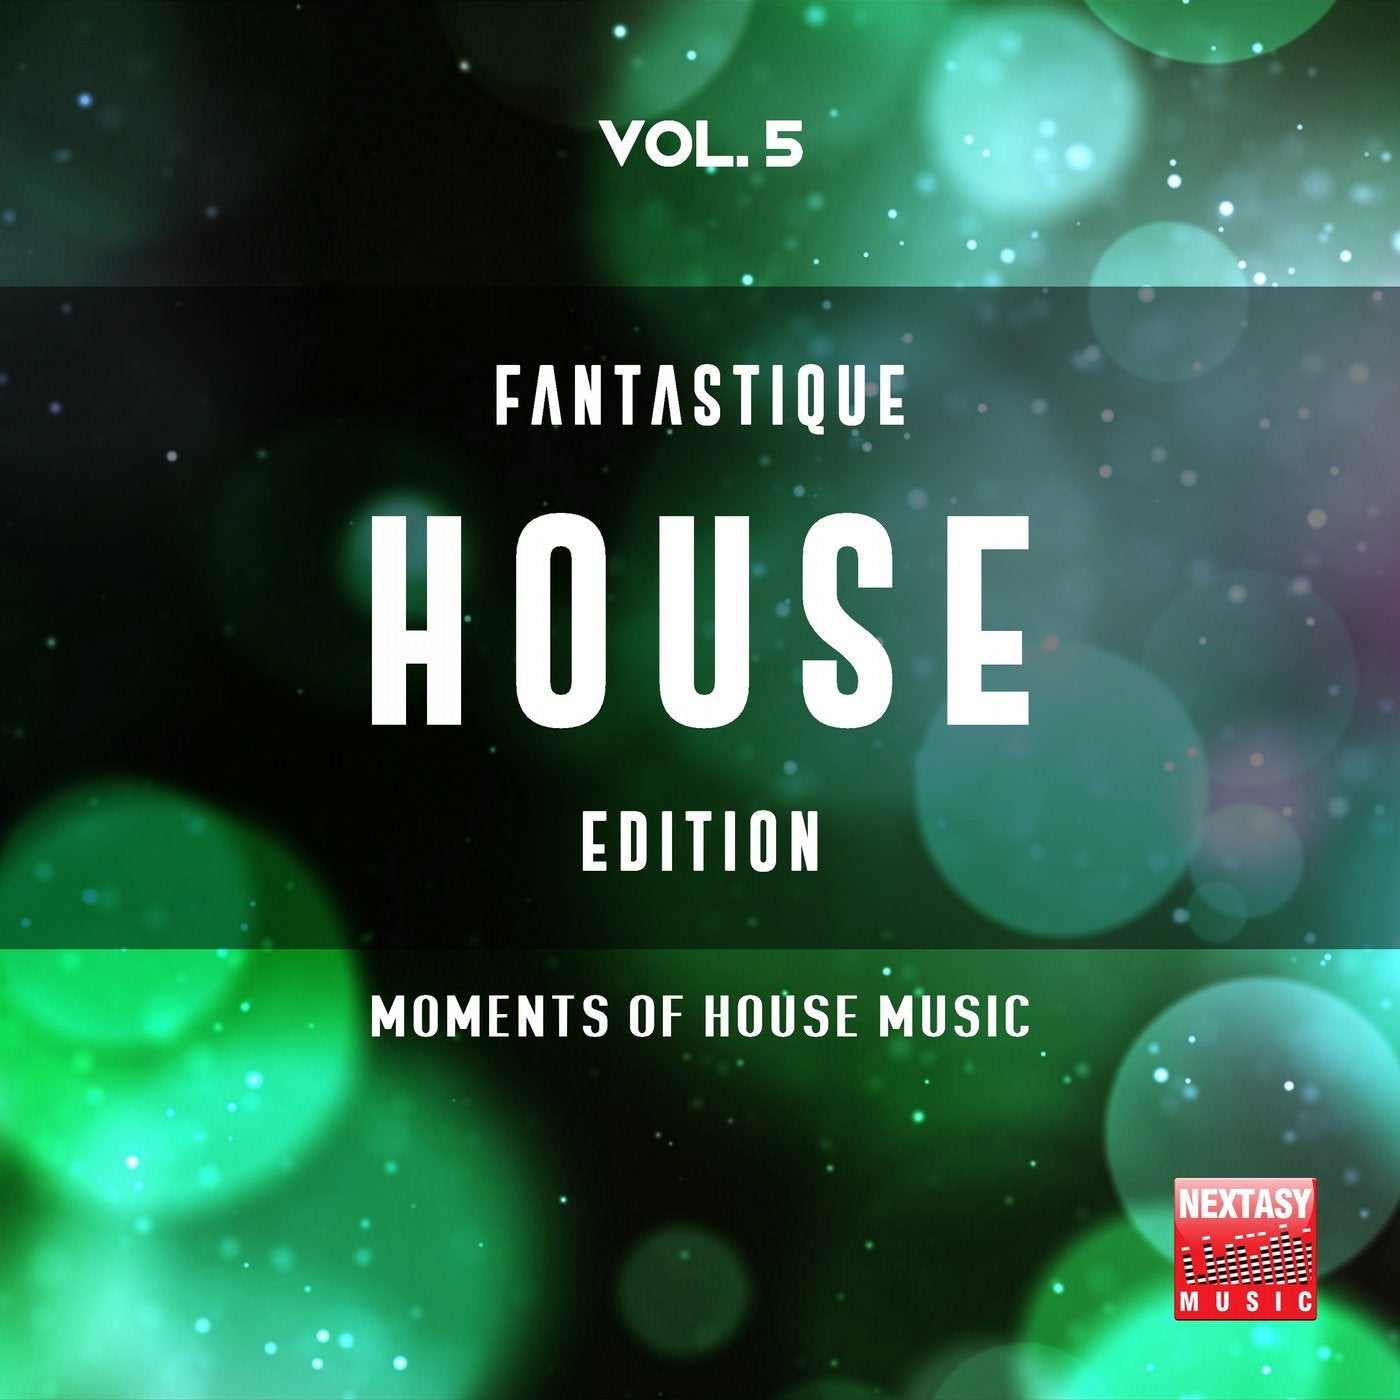 Fantastique House Edition, Vol. 5 (Moments Of House Music)